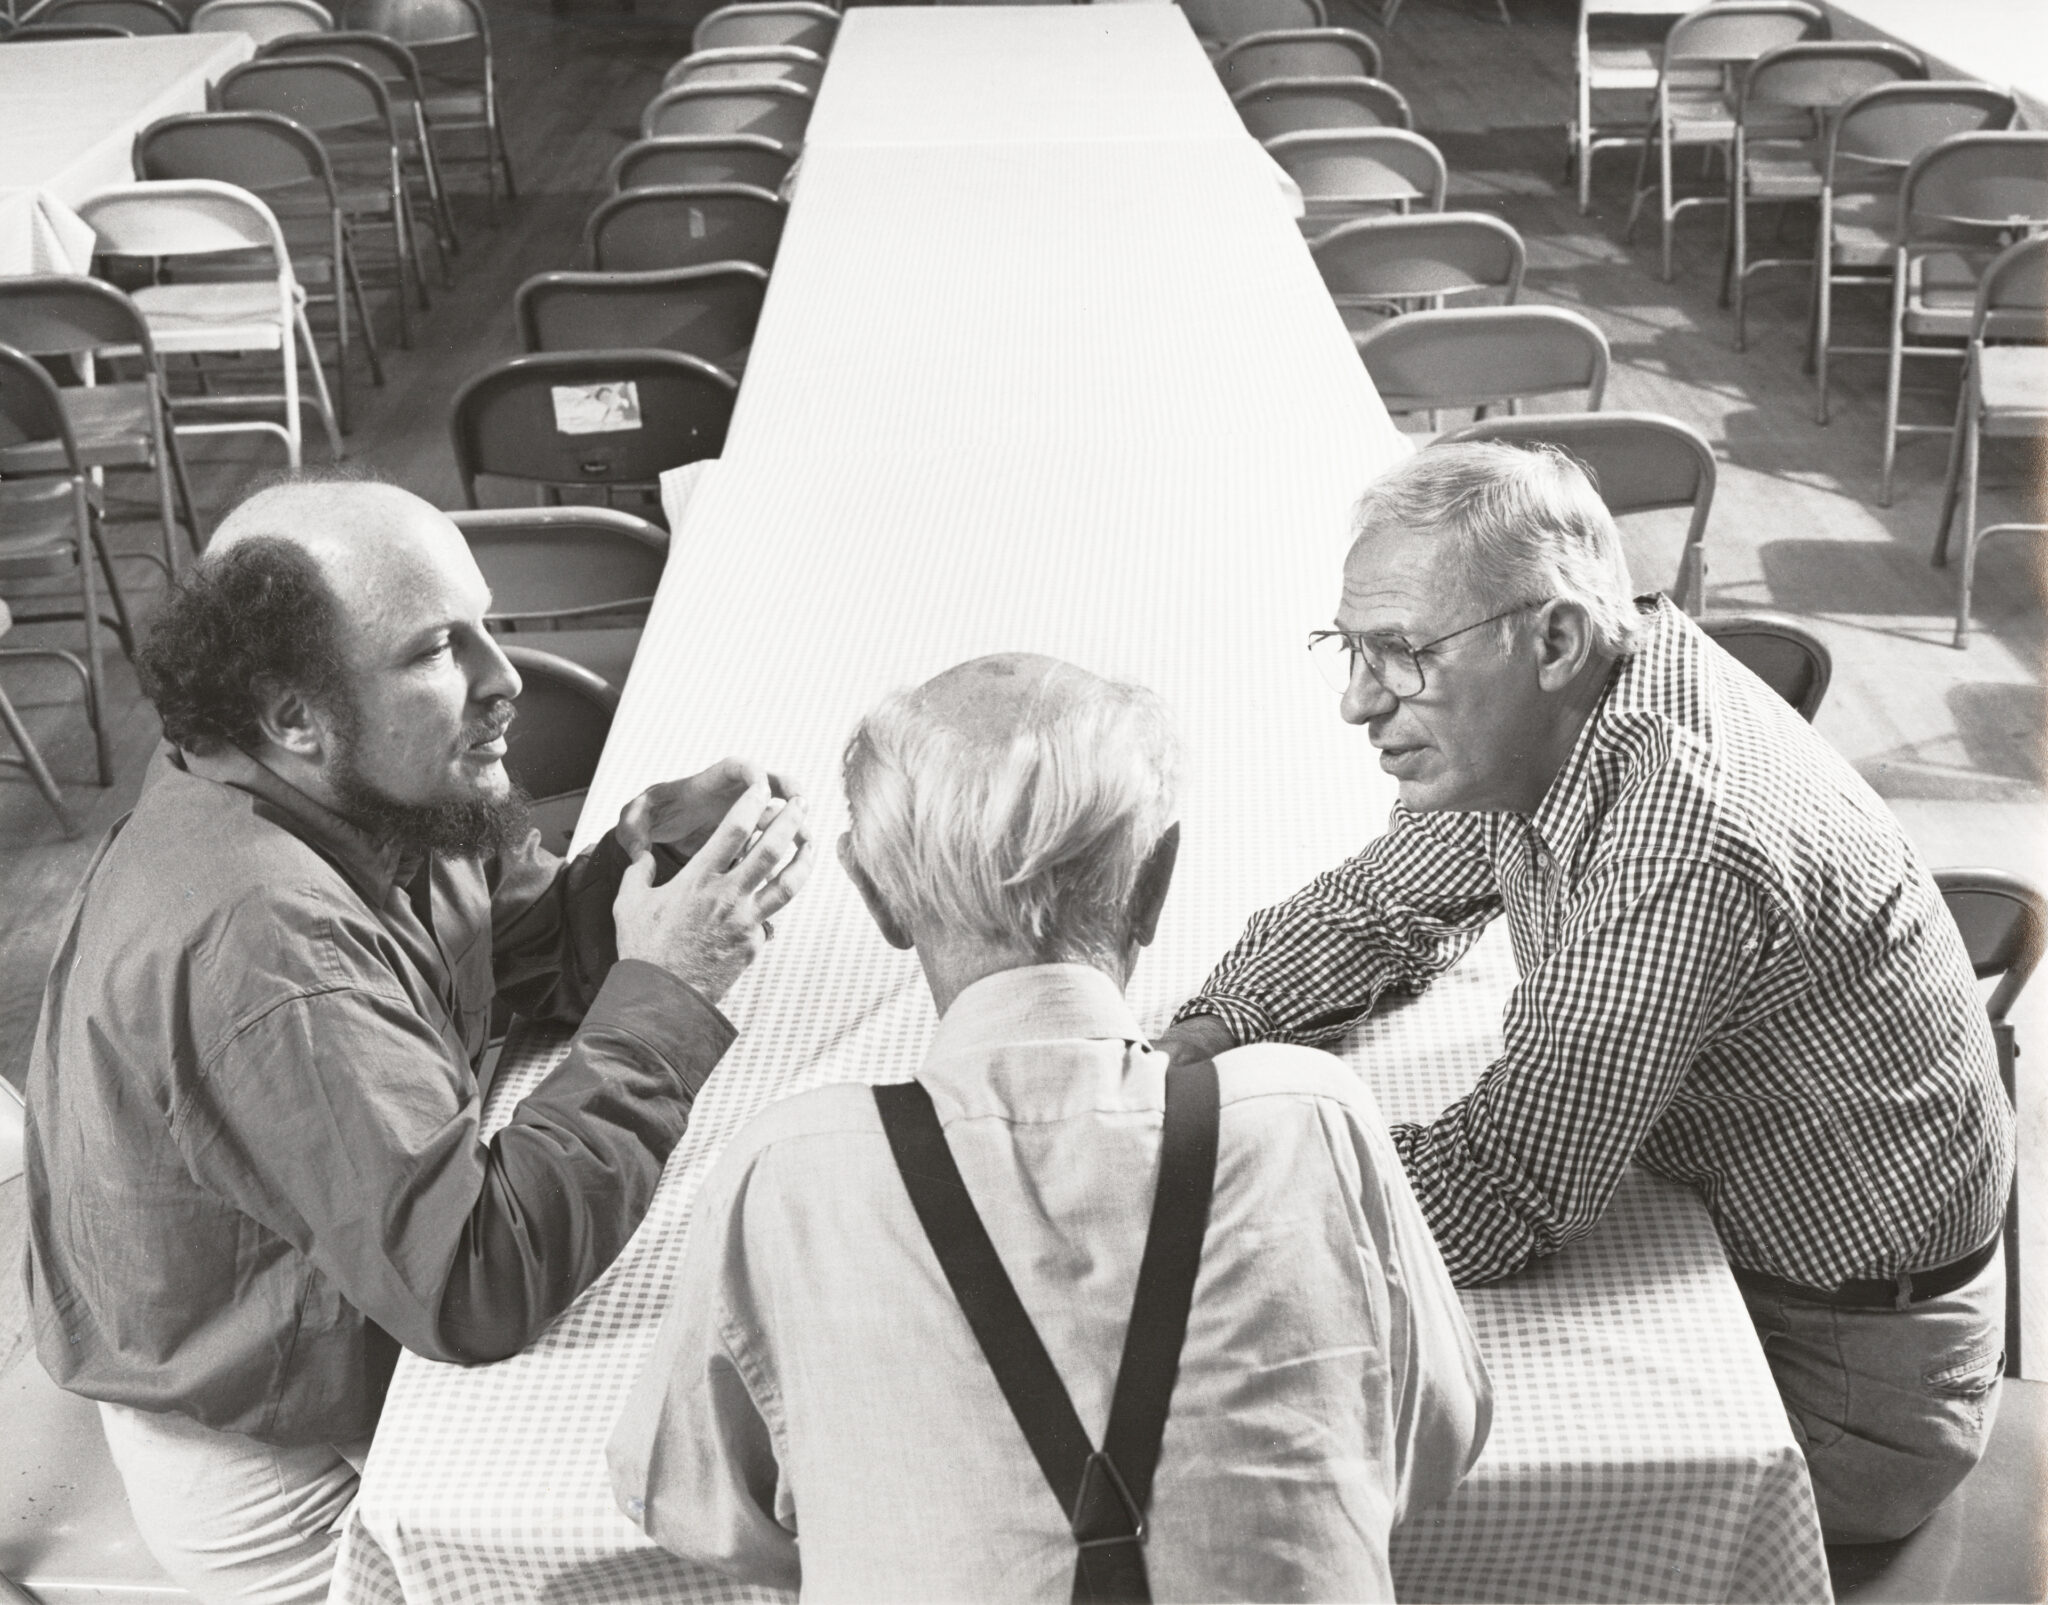 "I once told Mr. Serkin that I had no secrets. His response: 'I'm so sorry, Tony.'" –Anthony Checchia || pictured: Frank Salomon, Rudolf Serkin, and Anthony Checchia. Photo by Clemens Kalischer.